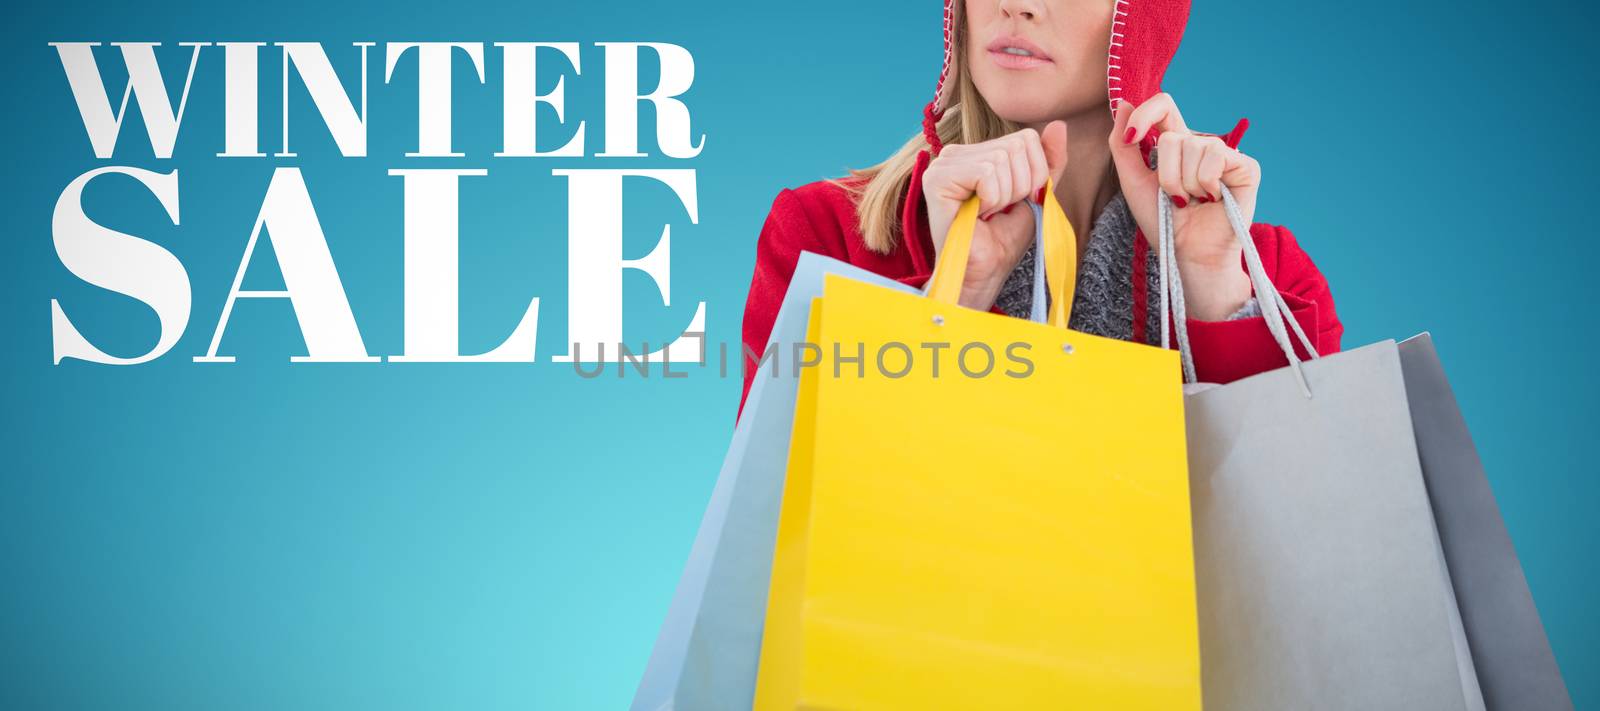 Blonde in winter clothes holding shopping bags against abstract blue background